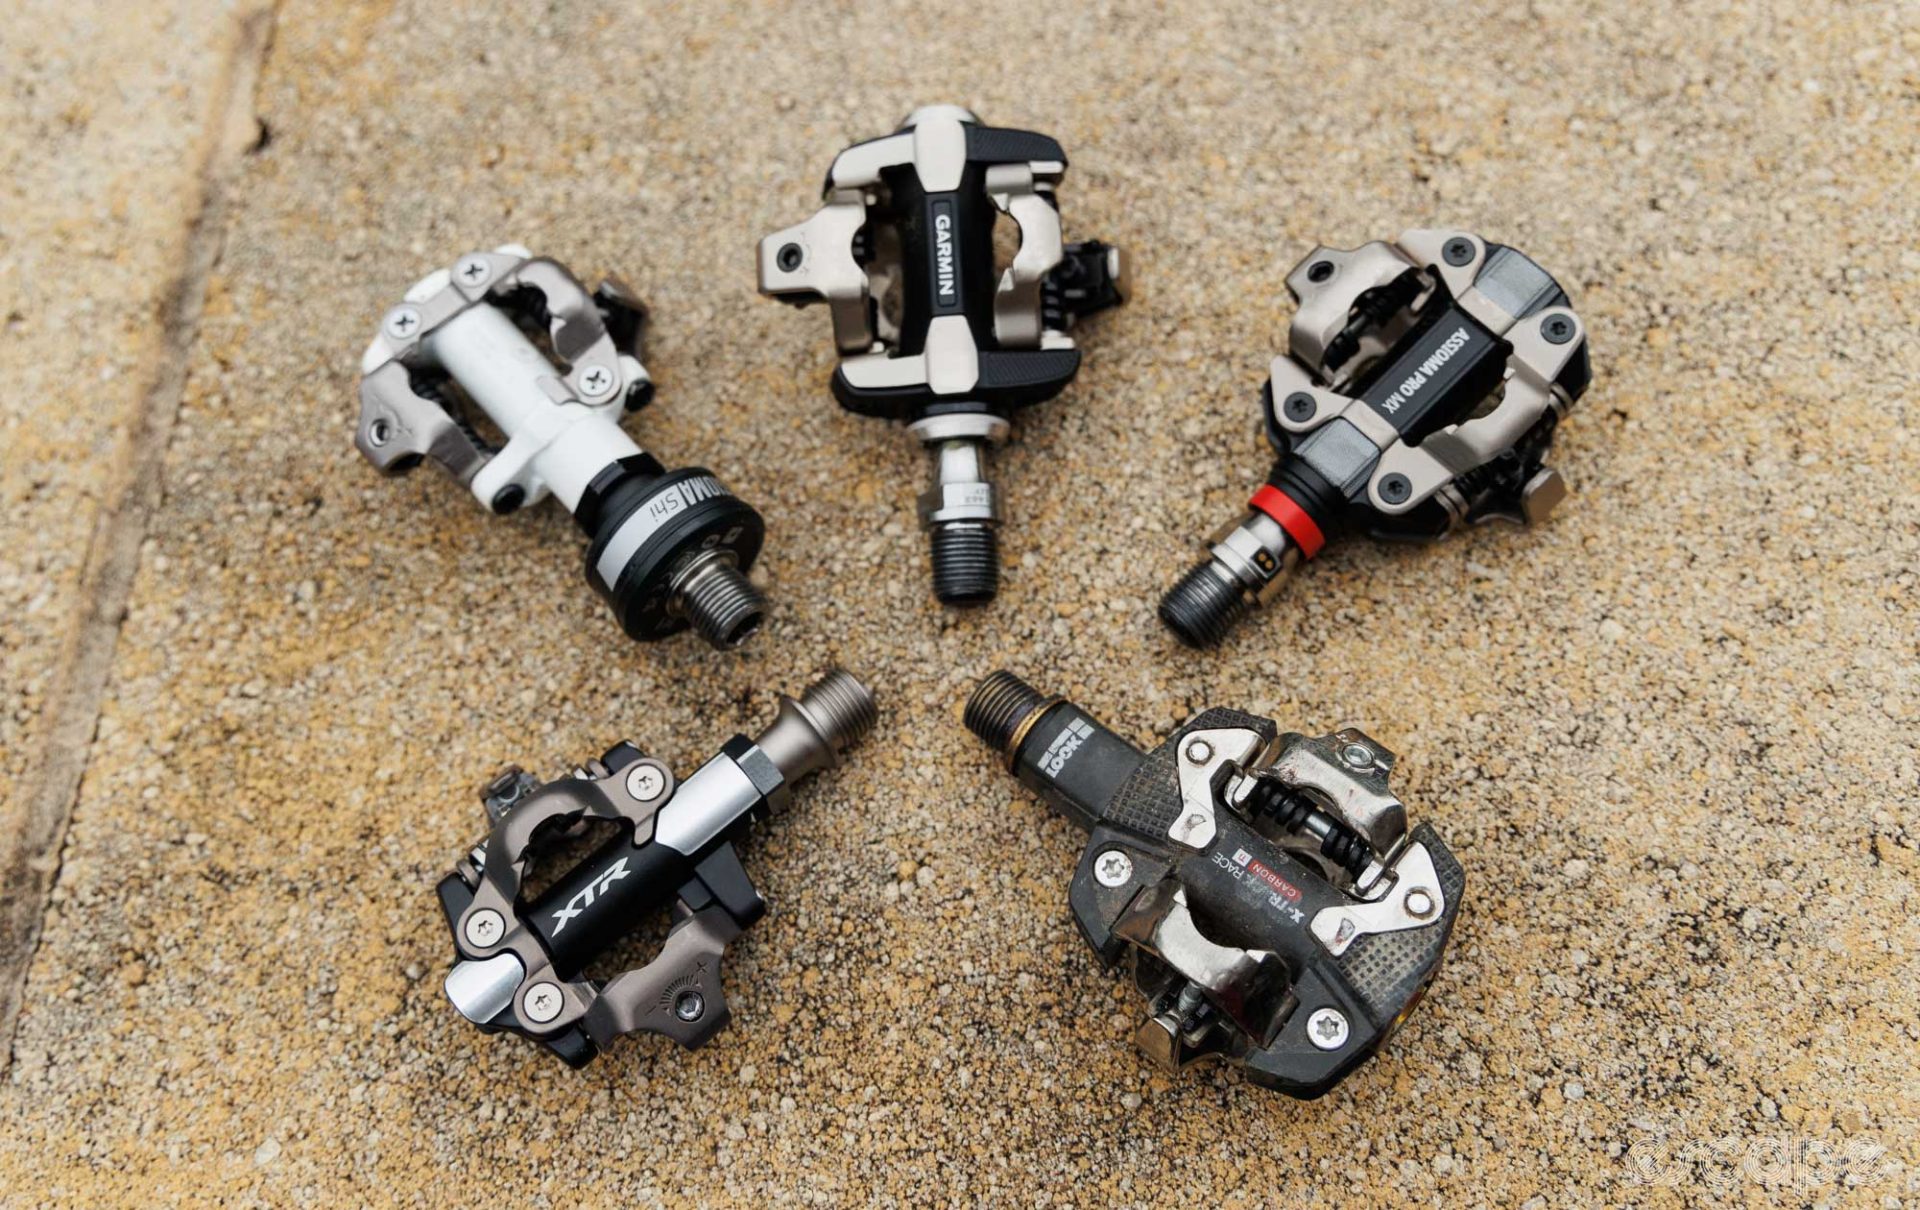 Five different SPD pedals laid out. Top right is the Favero Assioma Pro MX-2 pedals. Following in a clockwise direction, there is the Look X-Track Race, Shimano XTR, Shimano M520 with Favero Assioma Shi, and Garmin Rally XC200. 